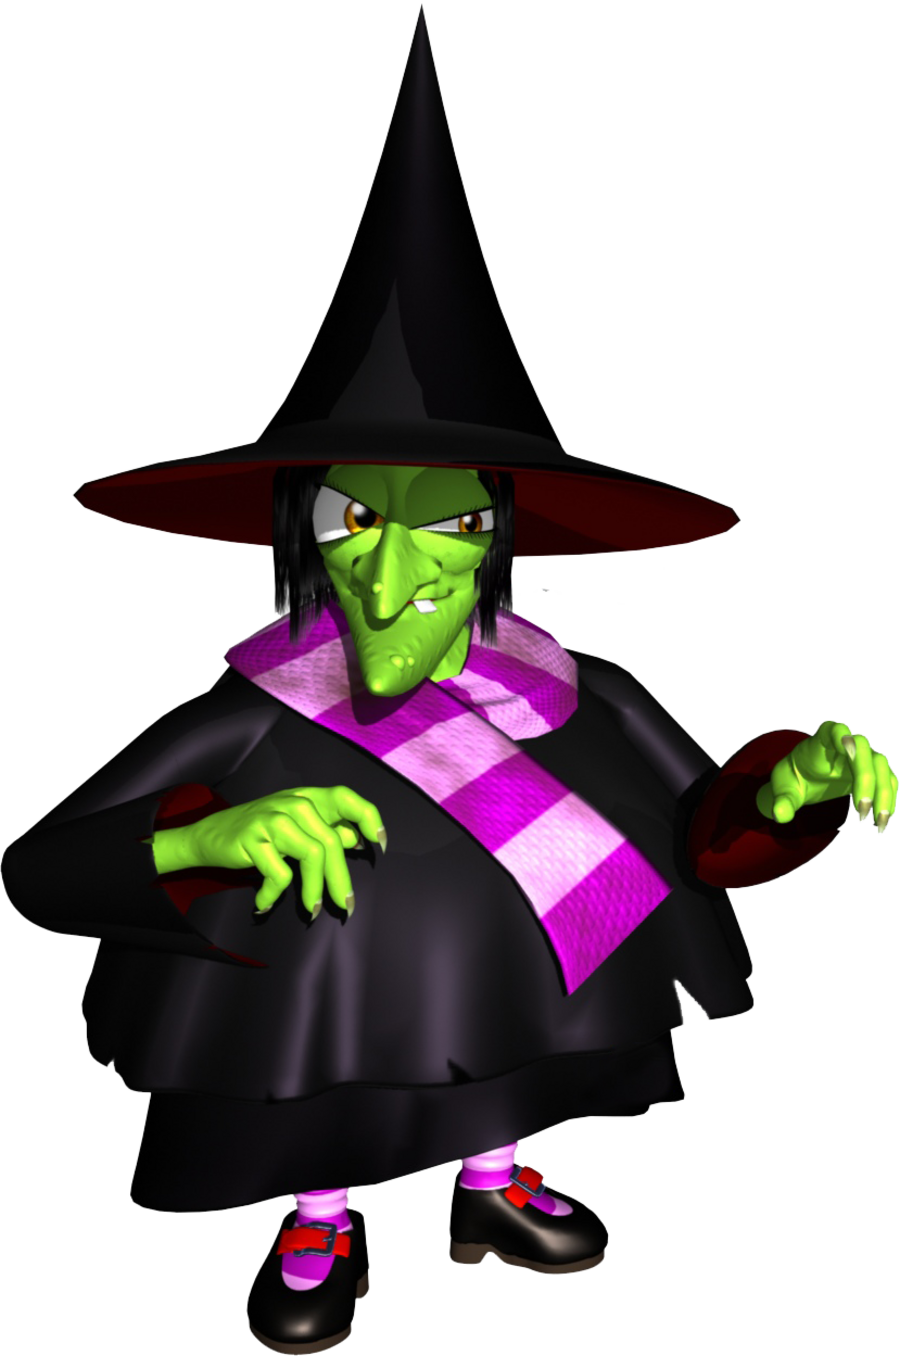 Which of the following is NOT one of Gruntilda’s sisters from the Banjo-Kazooie series?